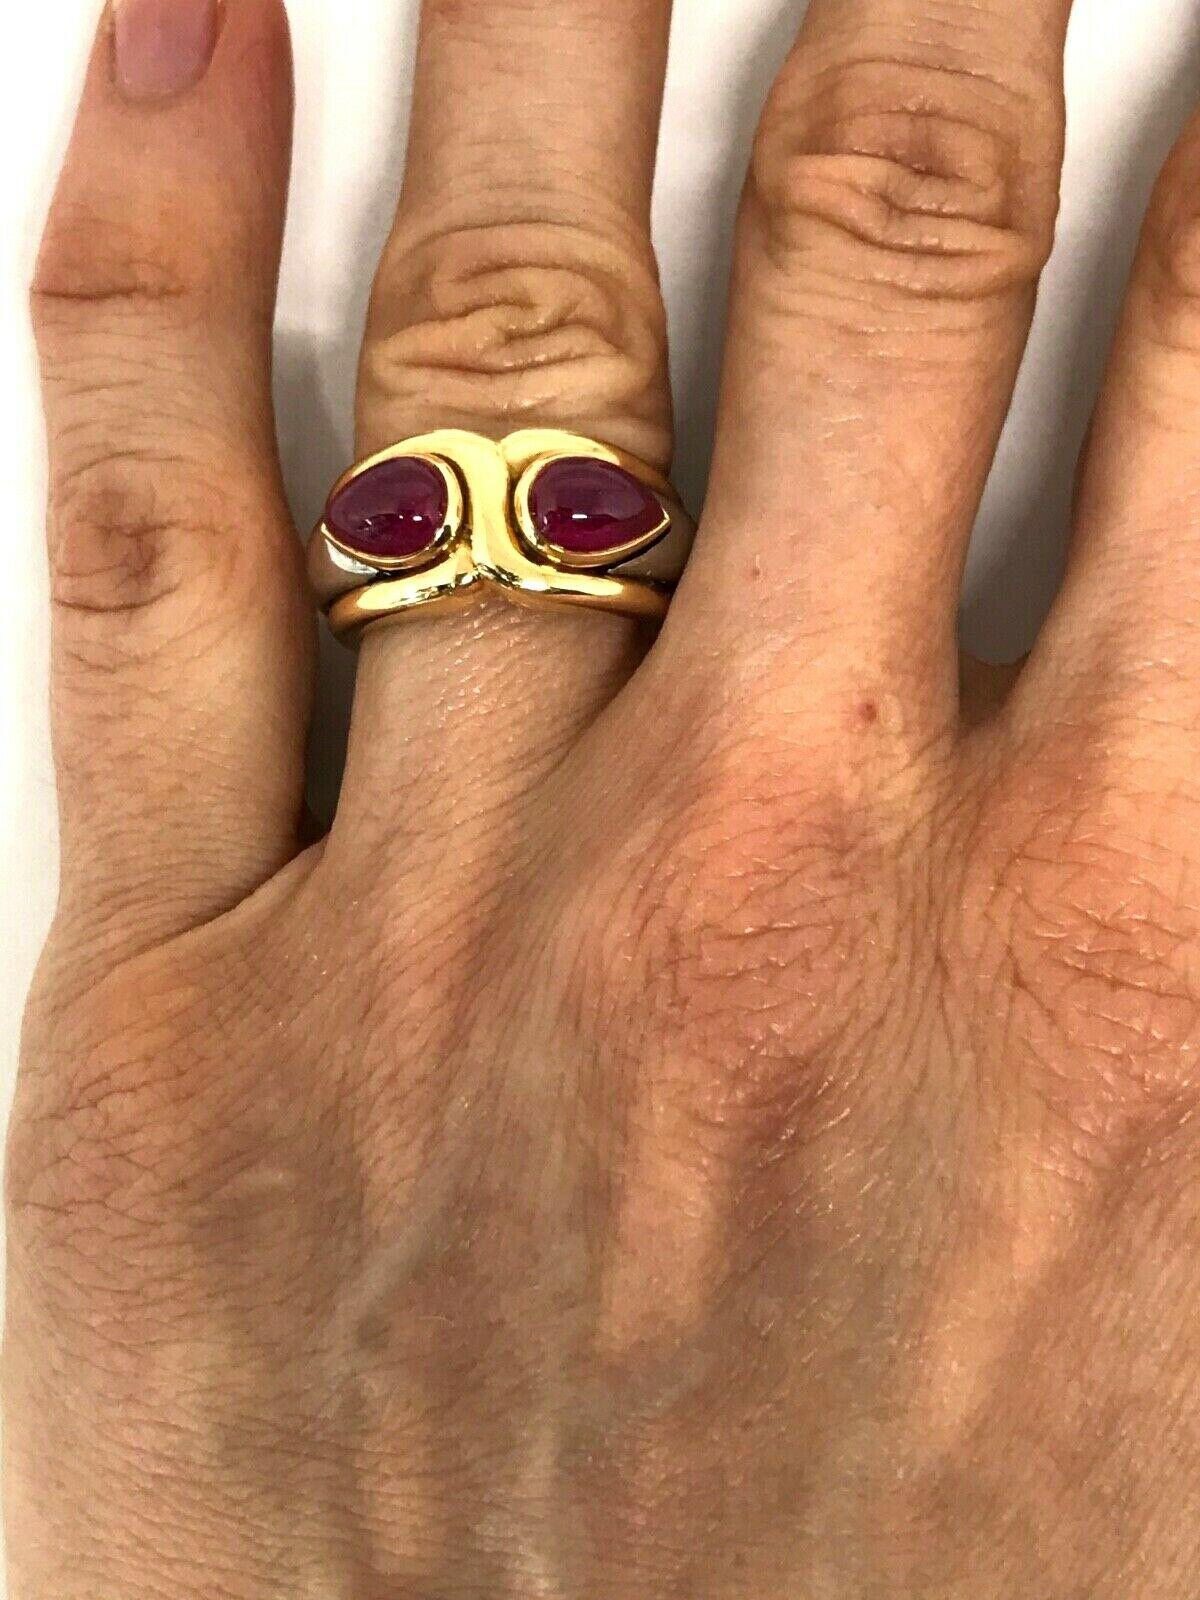 Stylish vintage 18k yellow gold ring by Bulgari features ruby and hematite. Rubies are cabochon cut, total weight is 3.69 carats (stamped). Stamped with the Bulgari maker's marks and a hallmark for 18k gold as well.
Measurements: the ring size is